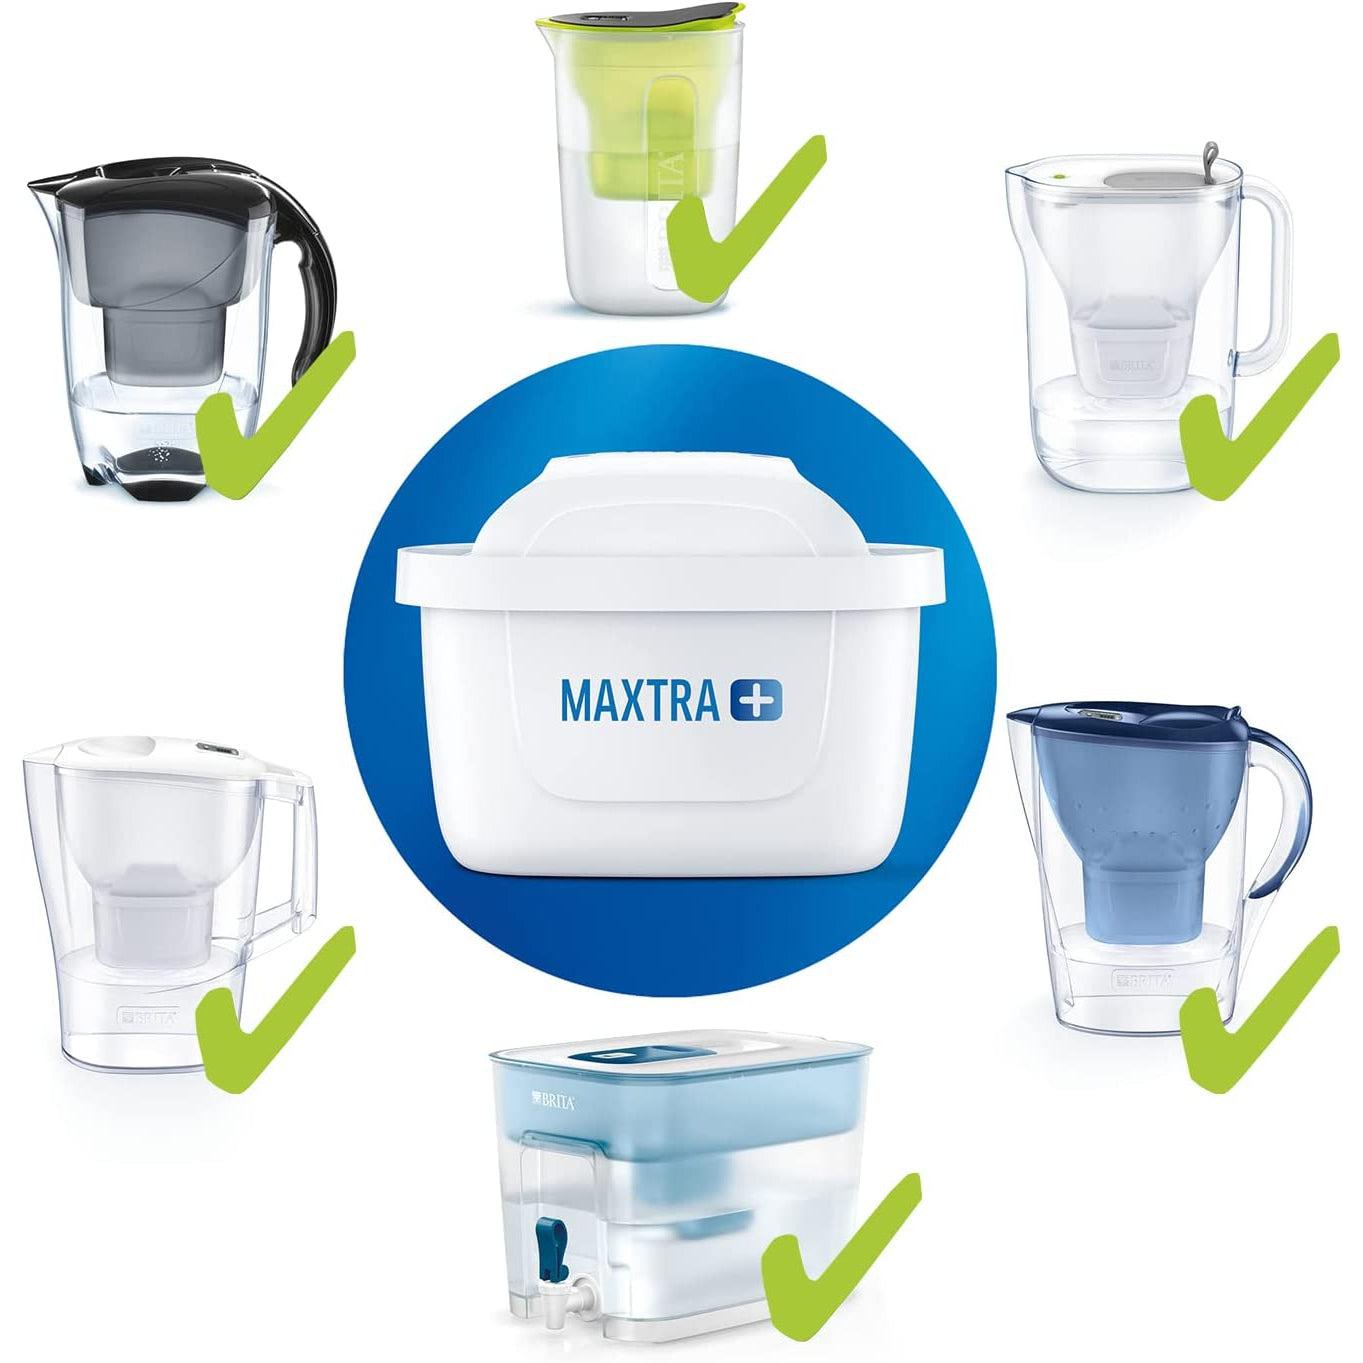 BRITA Maxtra+ Water Filter Cartridges - MicroFlow Technology Filtration, 4 Pack